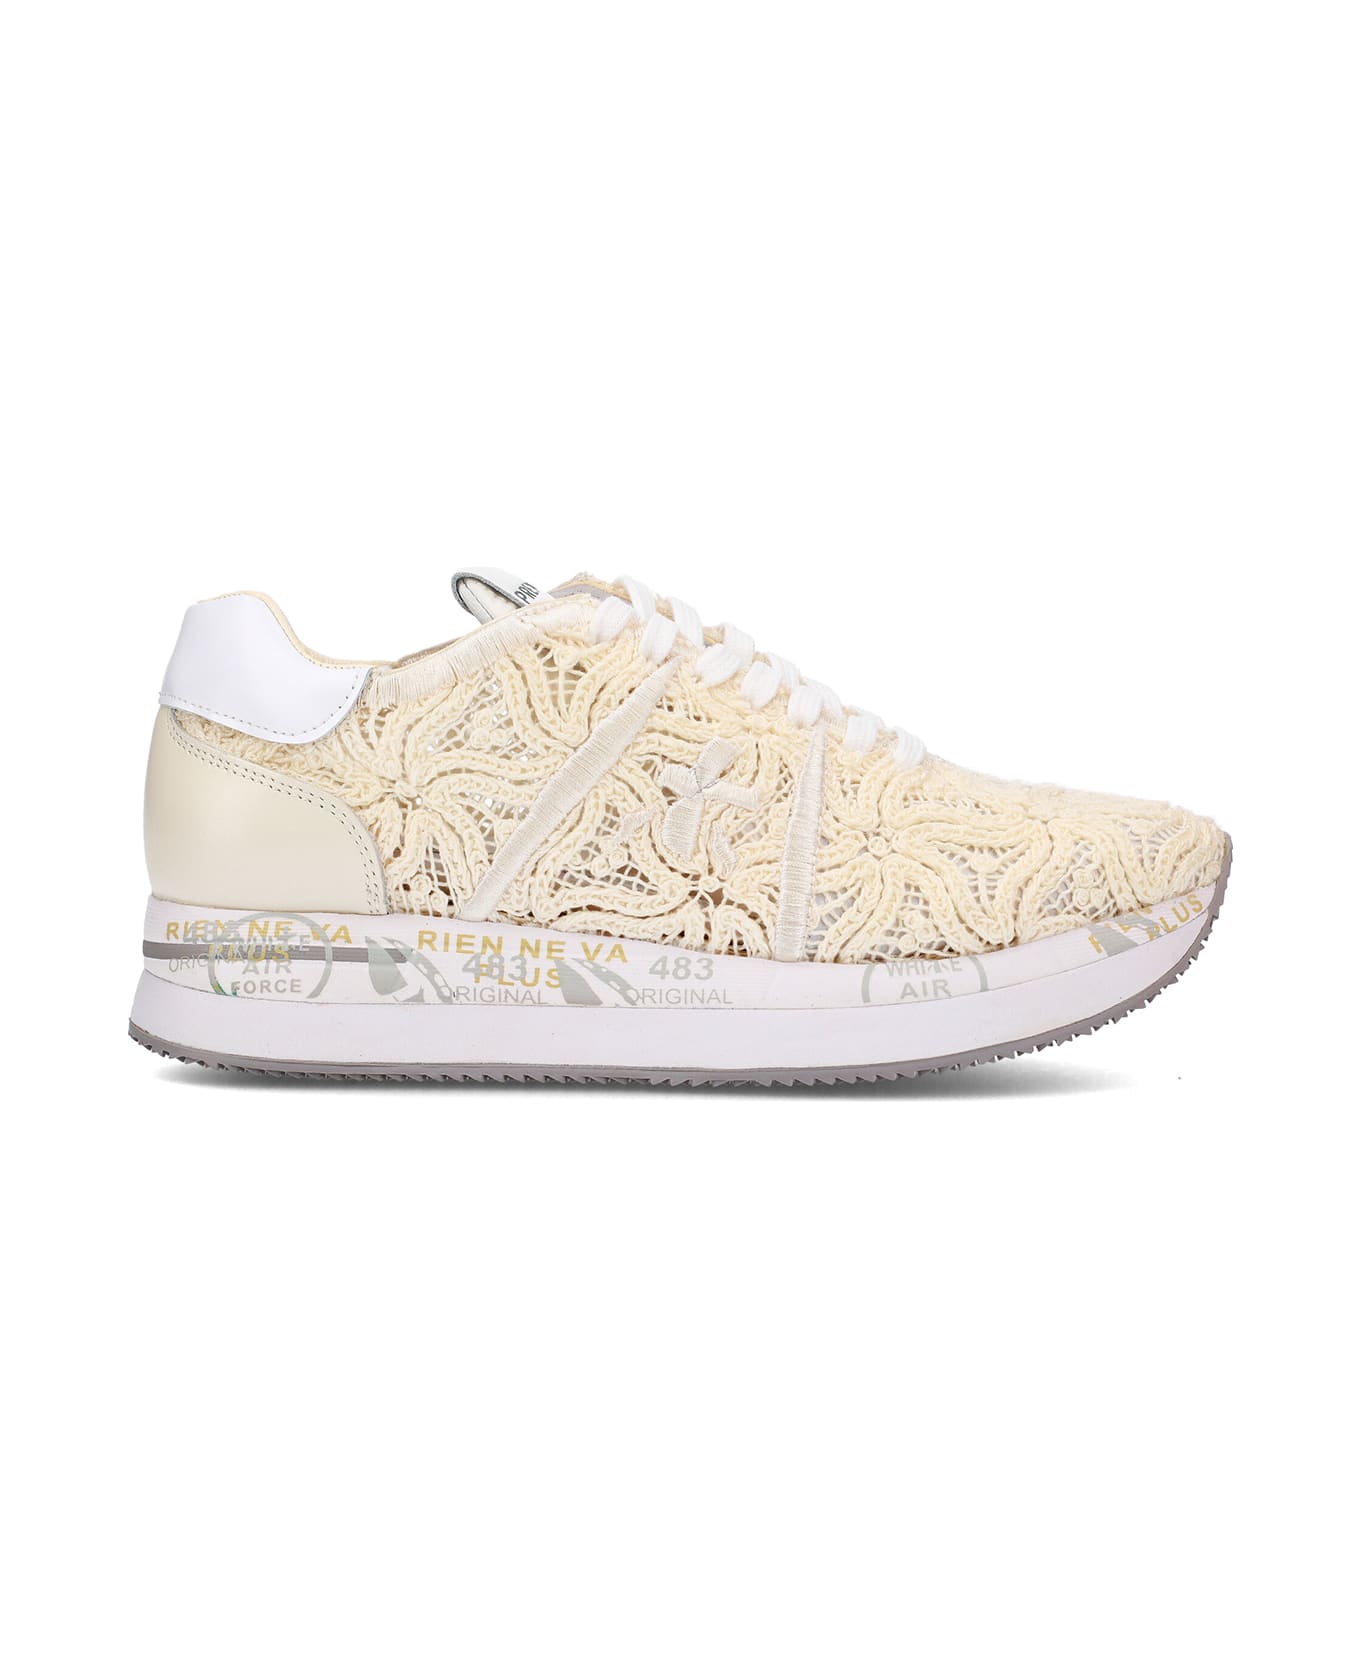 Premiata Conny 6787 Perforated Sneaker - NUDE